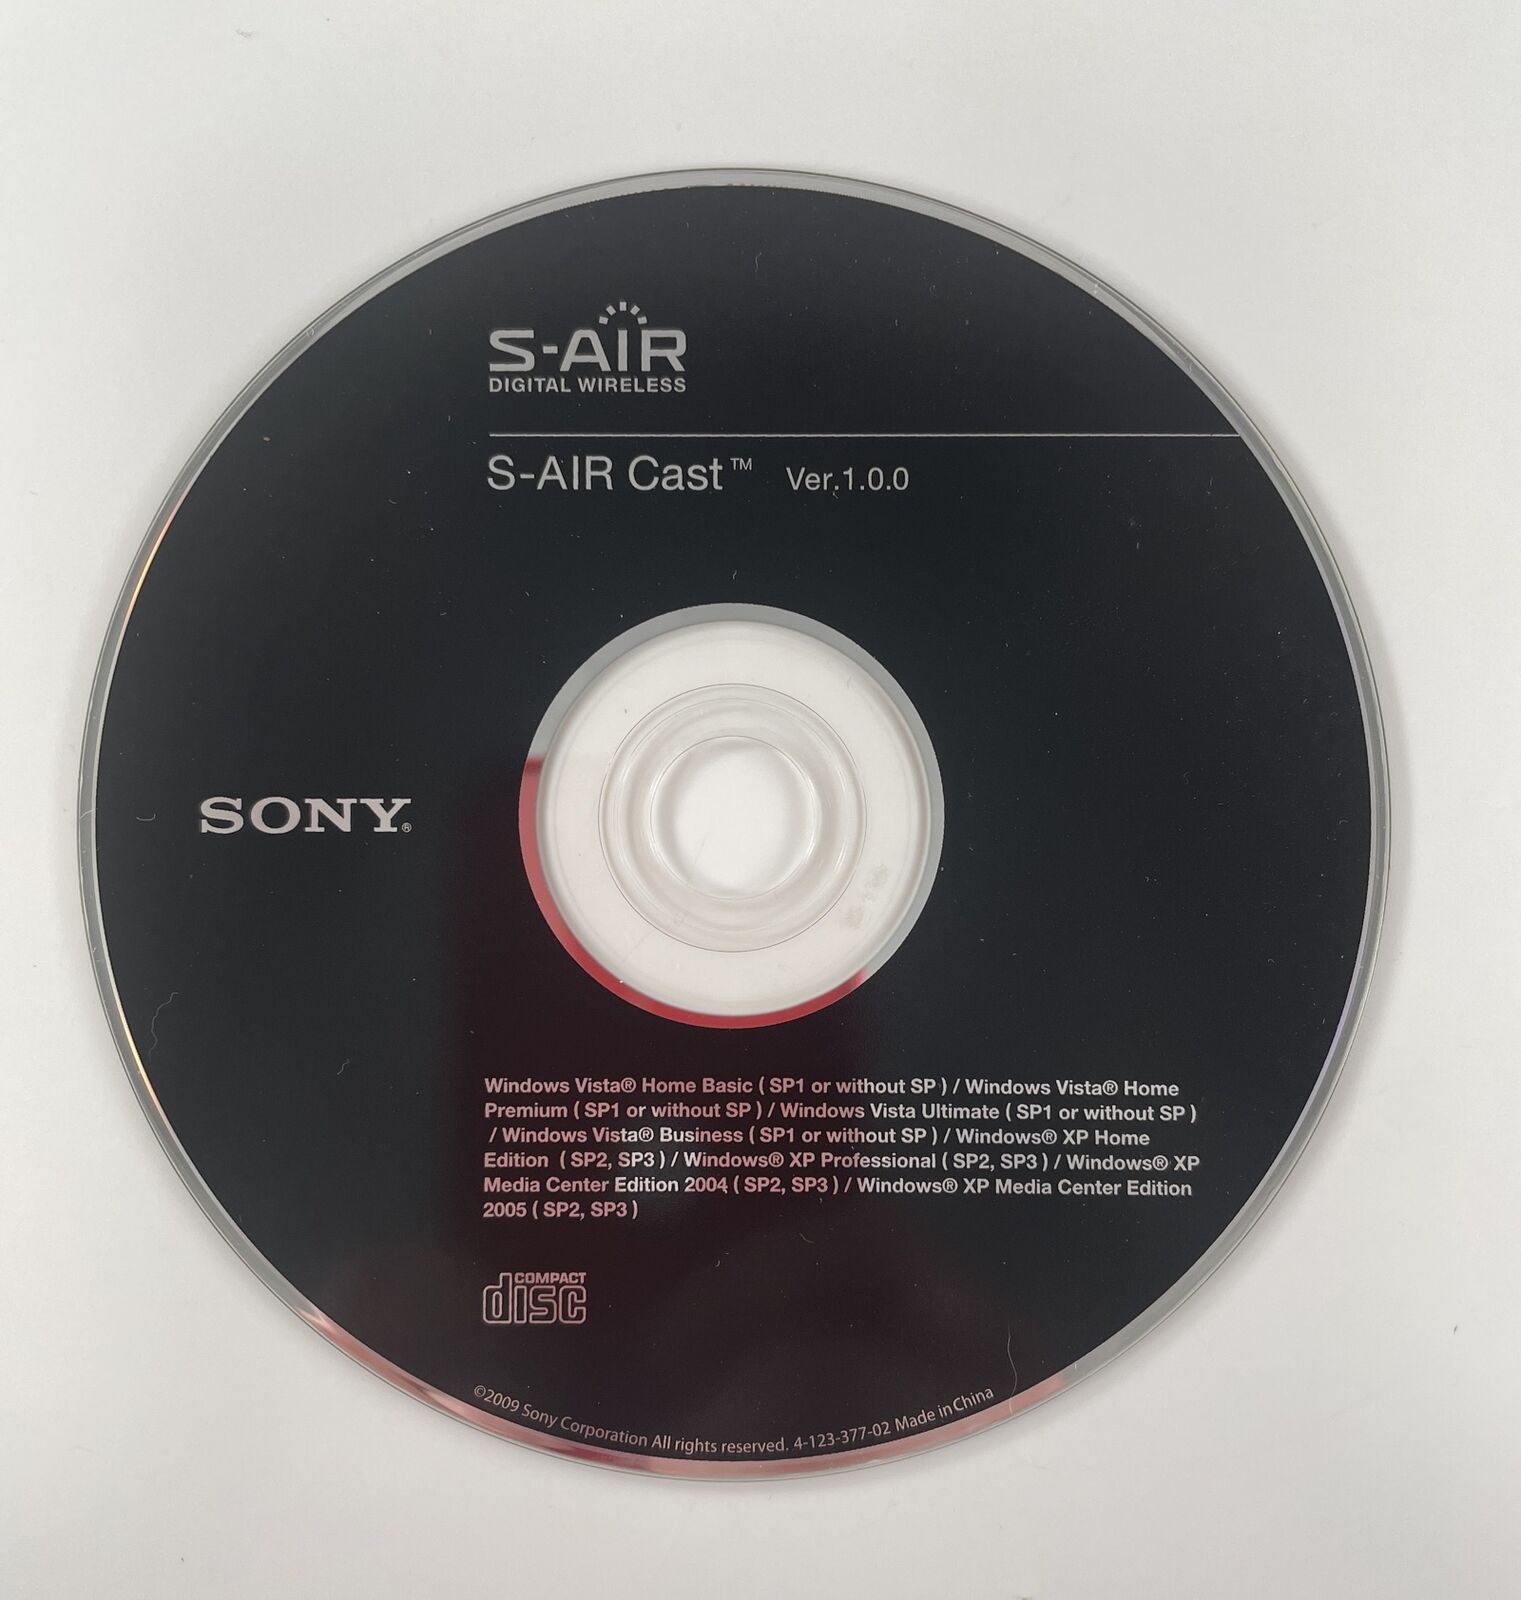 Sony Genuine S-AIR Digital Wireless Cast Replacement CD - ver 1.0.0